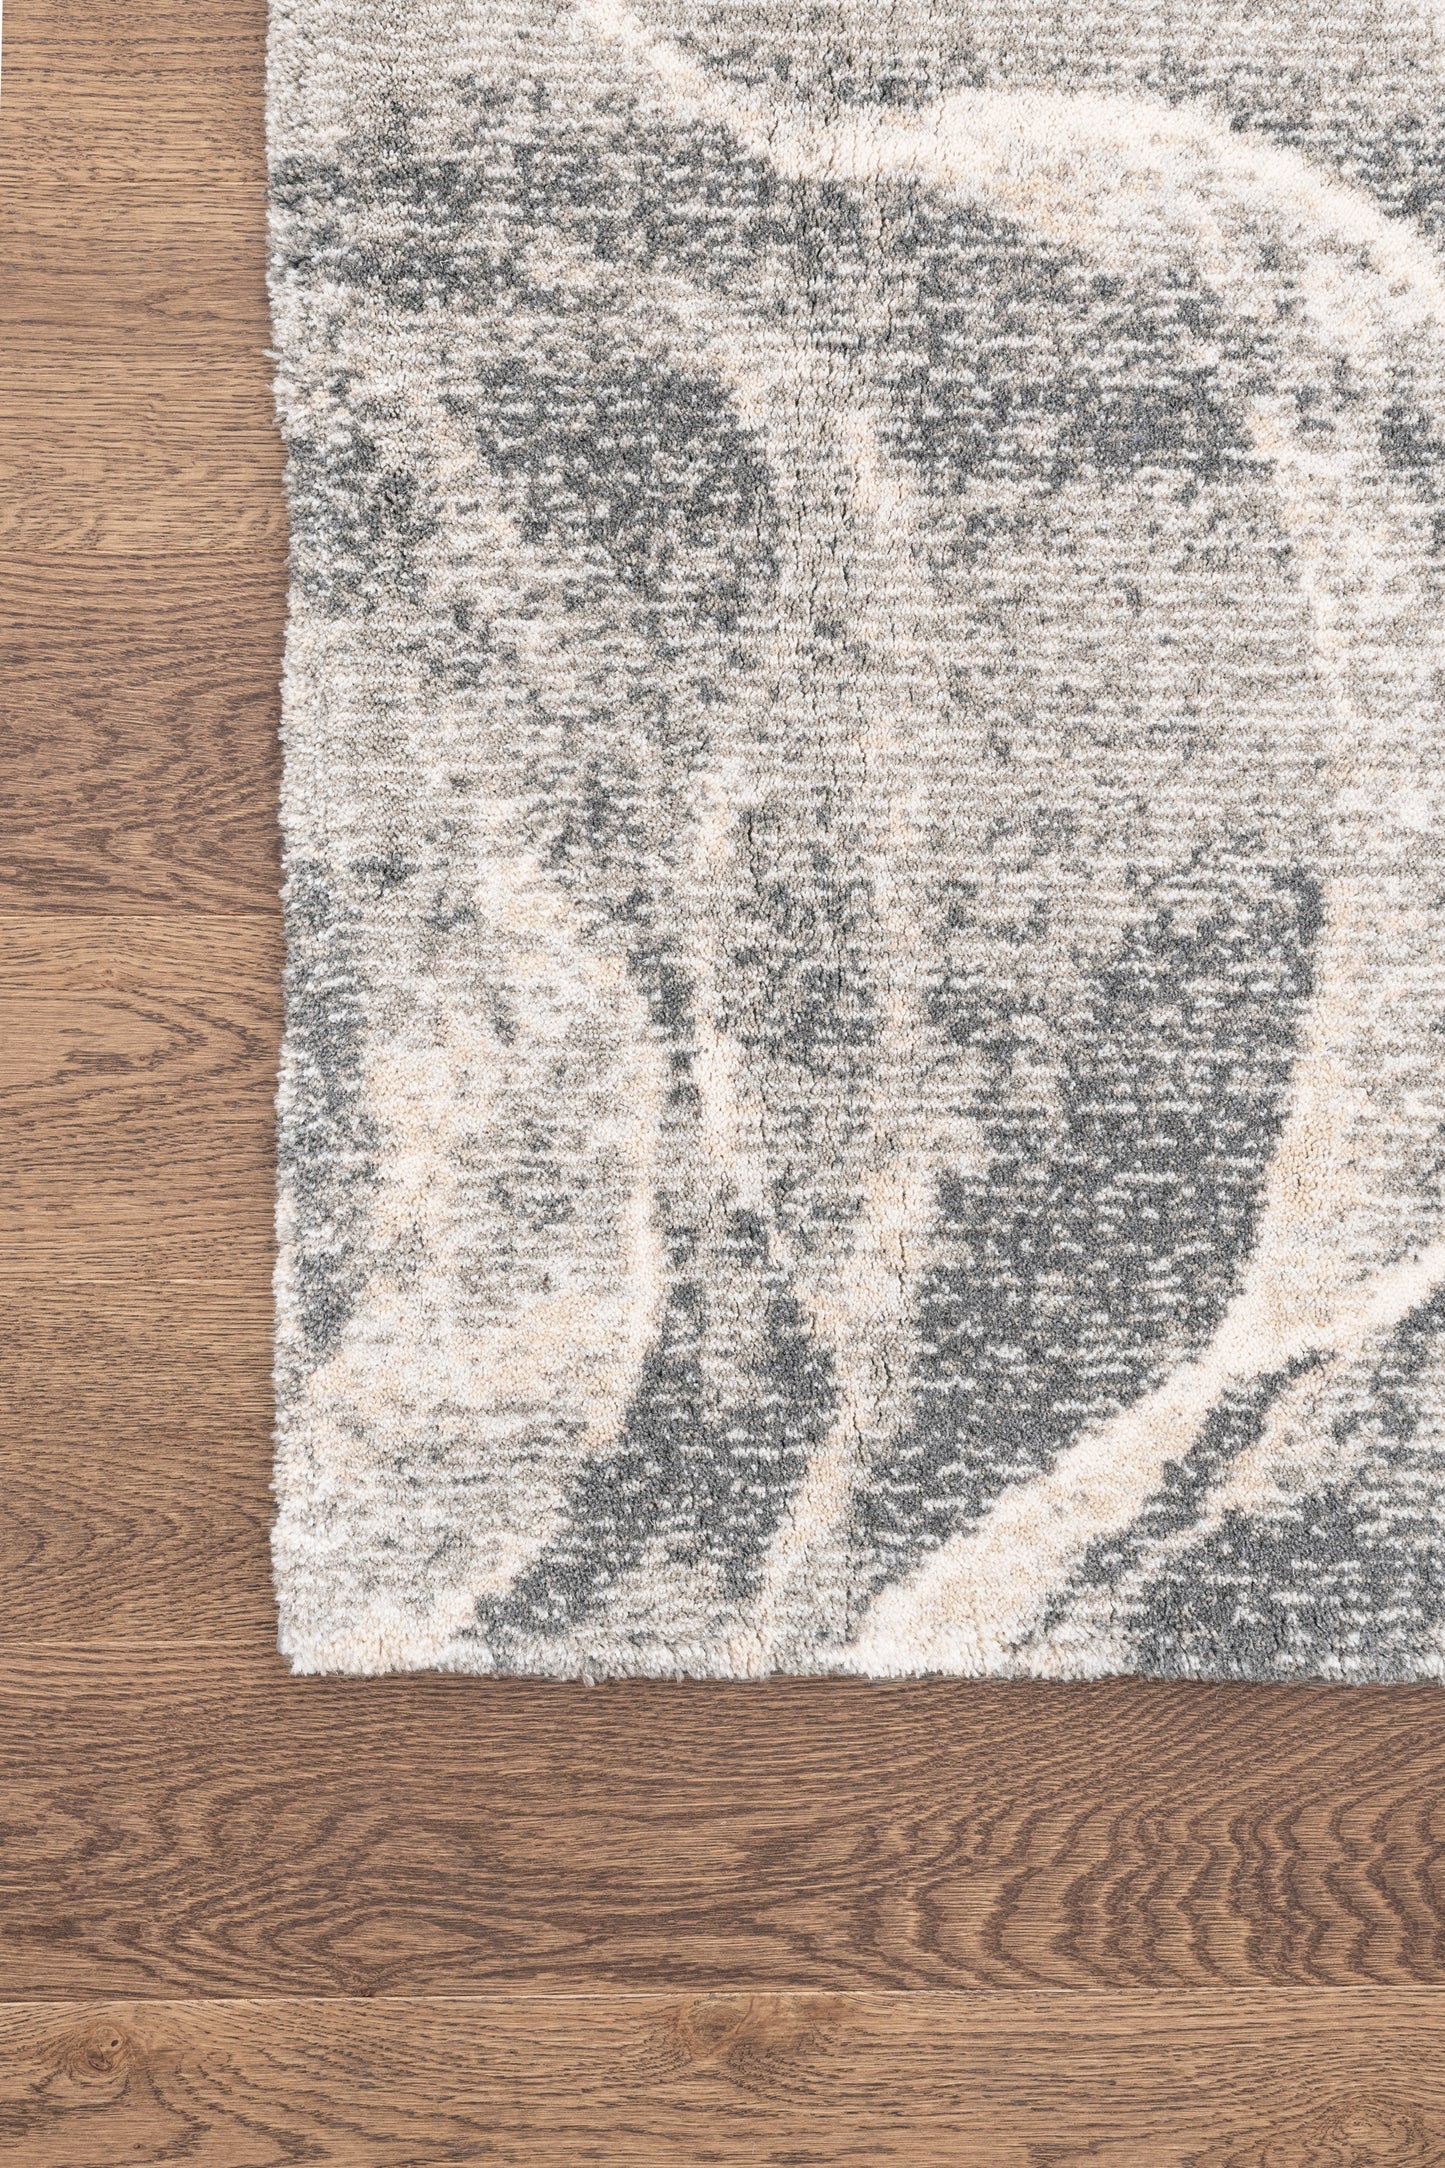 Agnella Rugs Calisia M ROS Anthracite - 50% British Wool 50% New Zealand Wool - Free Delivery